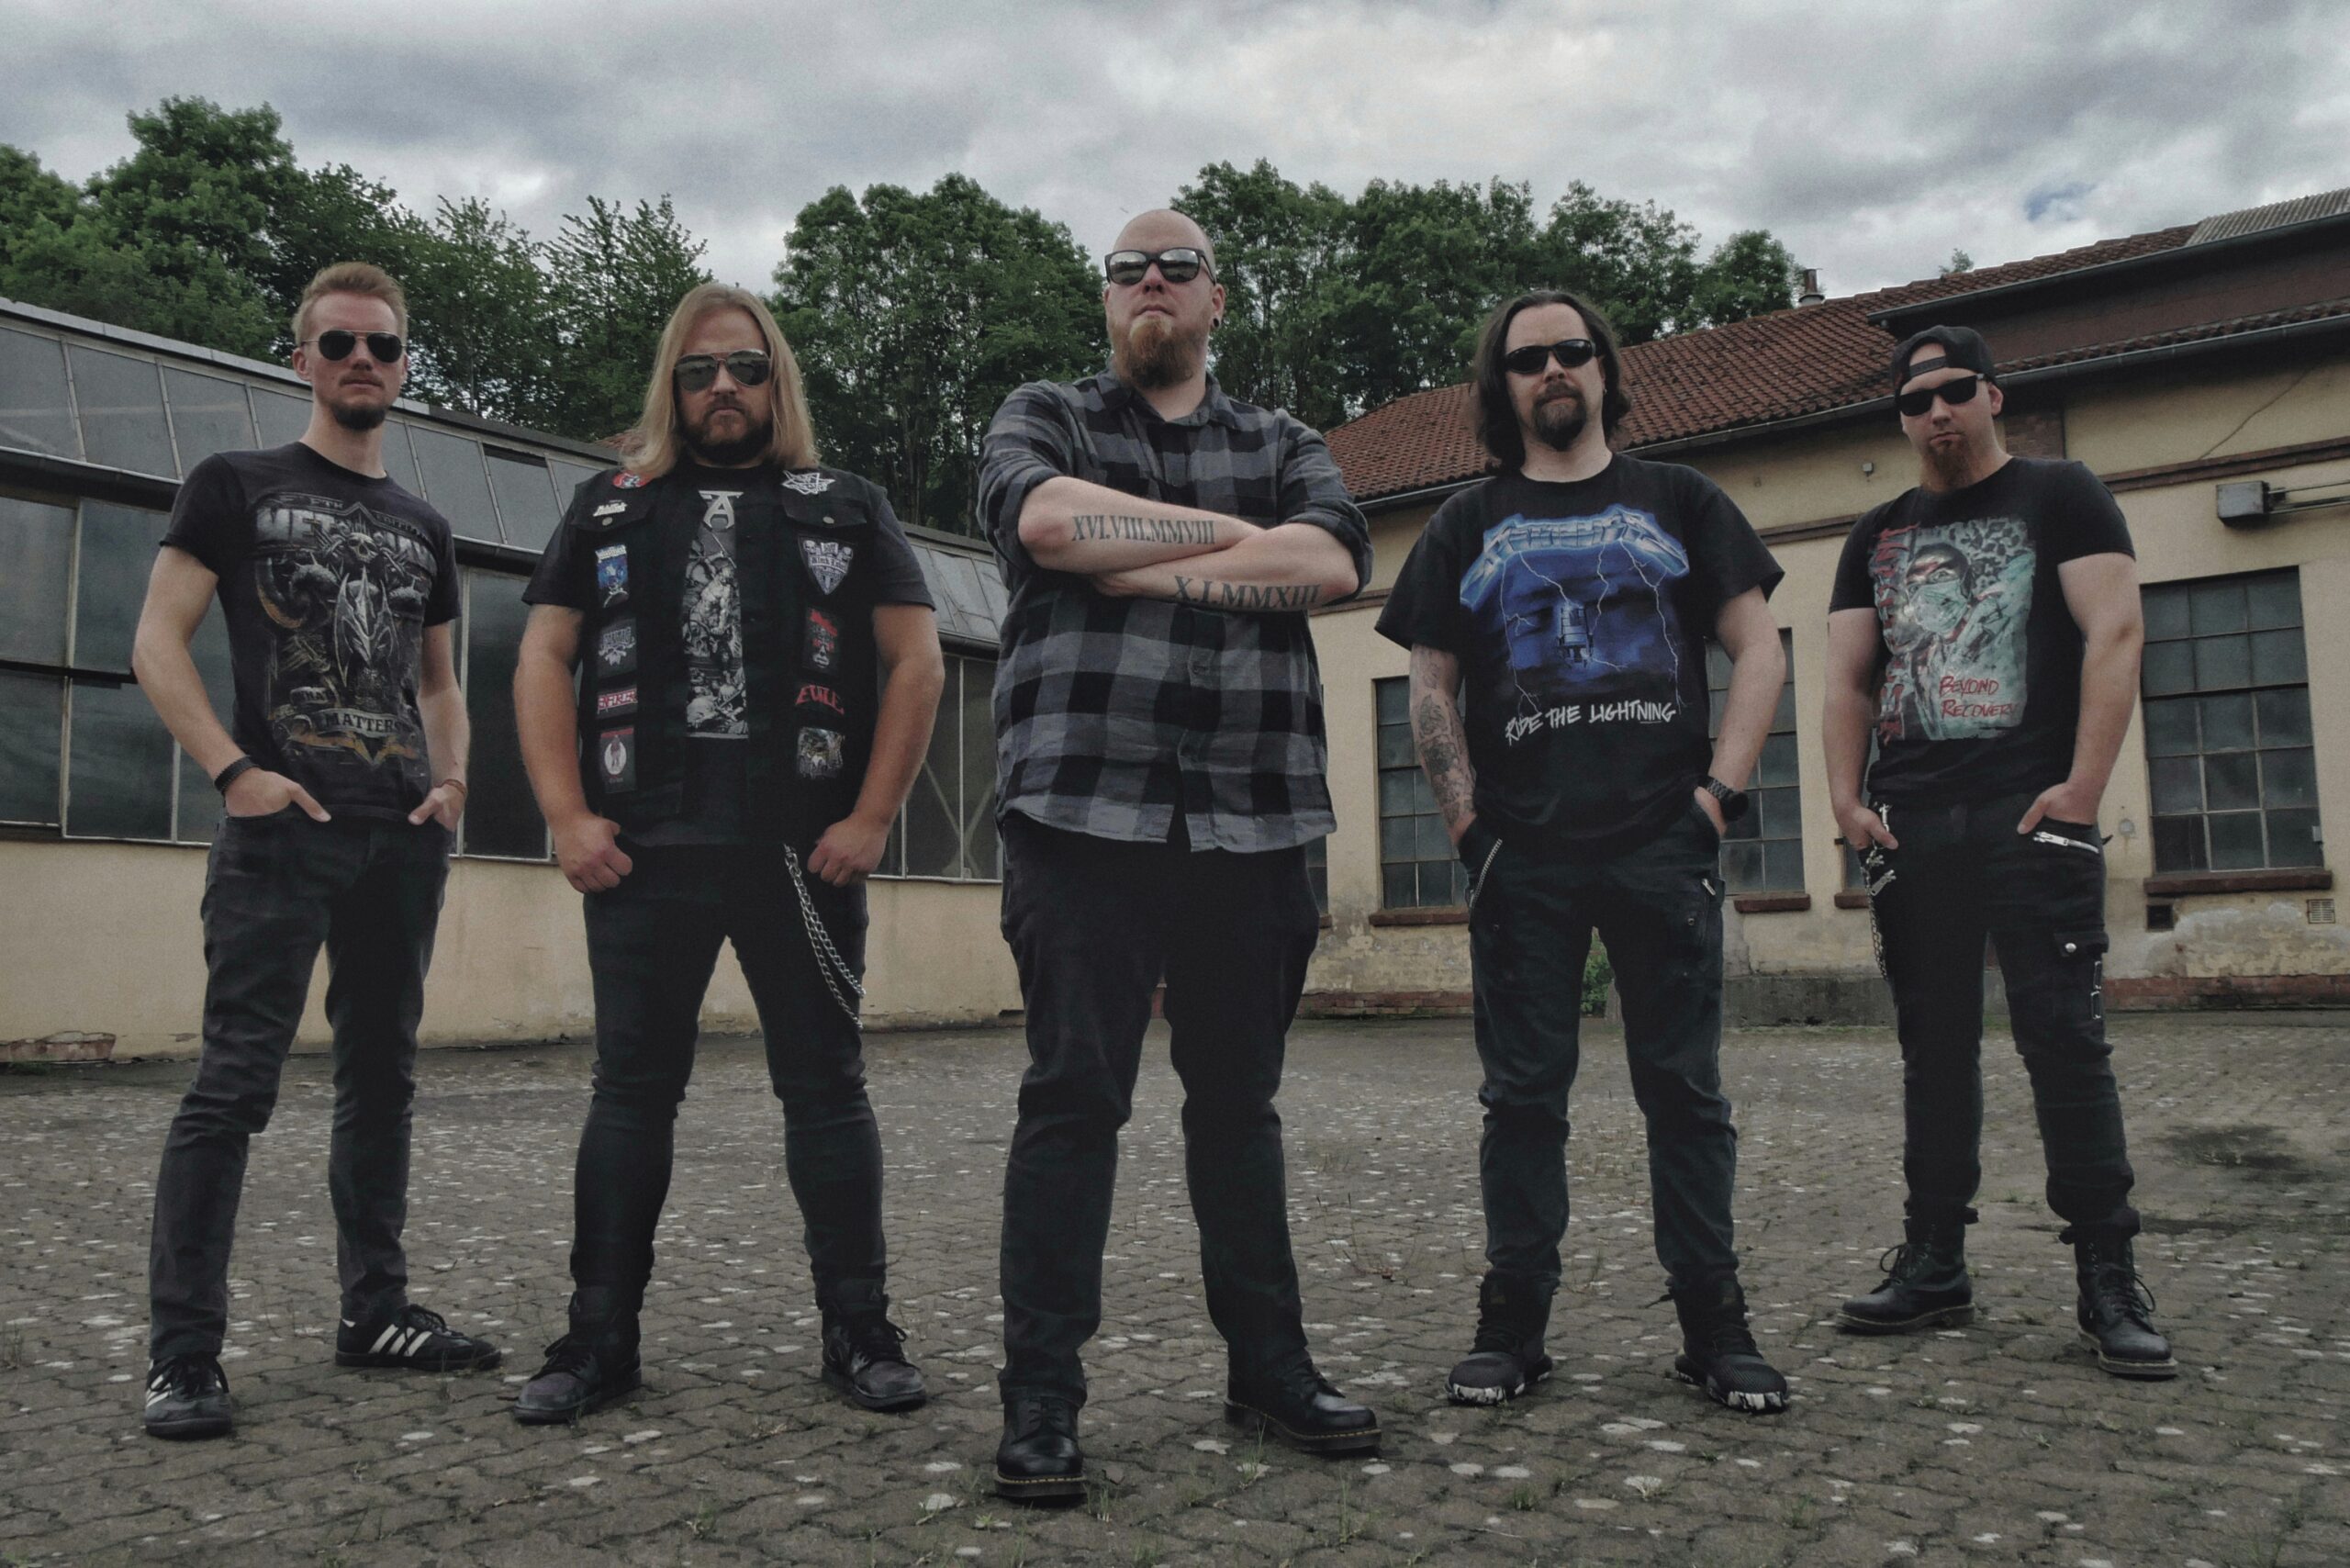 Bandphoto of Erasement. Five men, mostly dressed in black and wearing sunglasses, are standing in a row at some distance in front of abandoned-looking buildings. In the background you can see trees towering over the buildings and a cloudy sky. The photo is taken slightly from below.